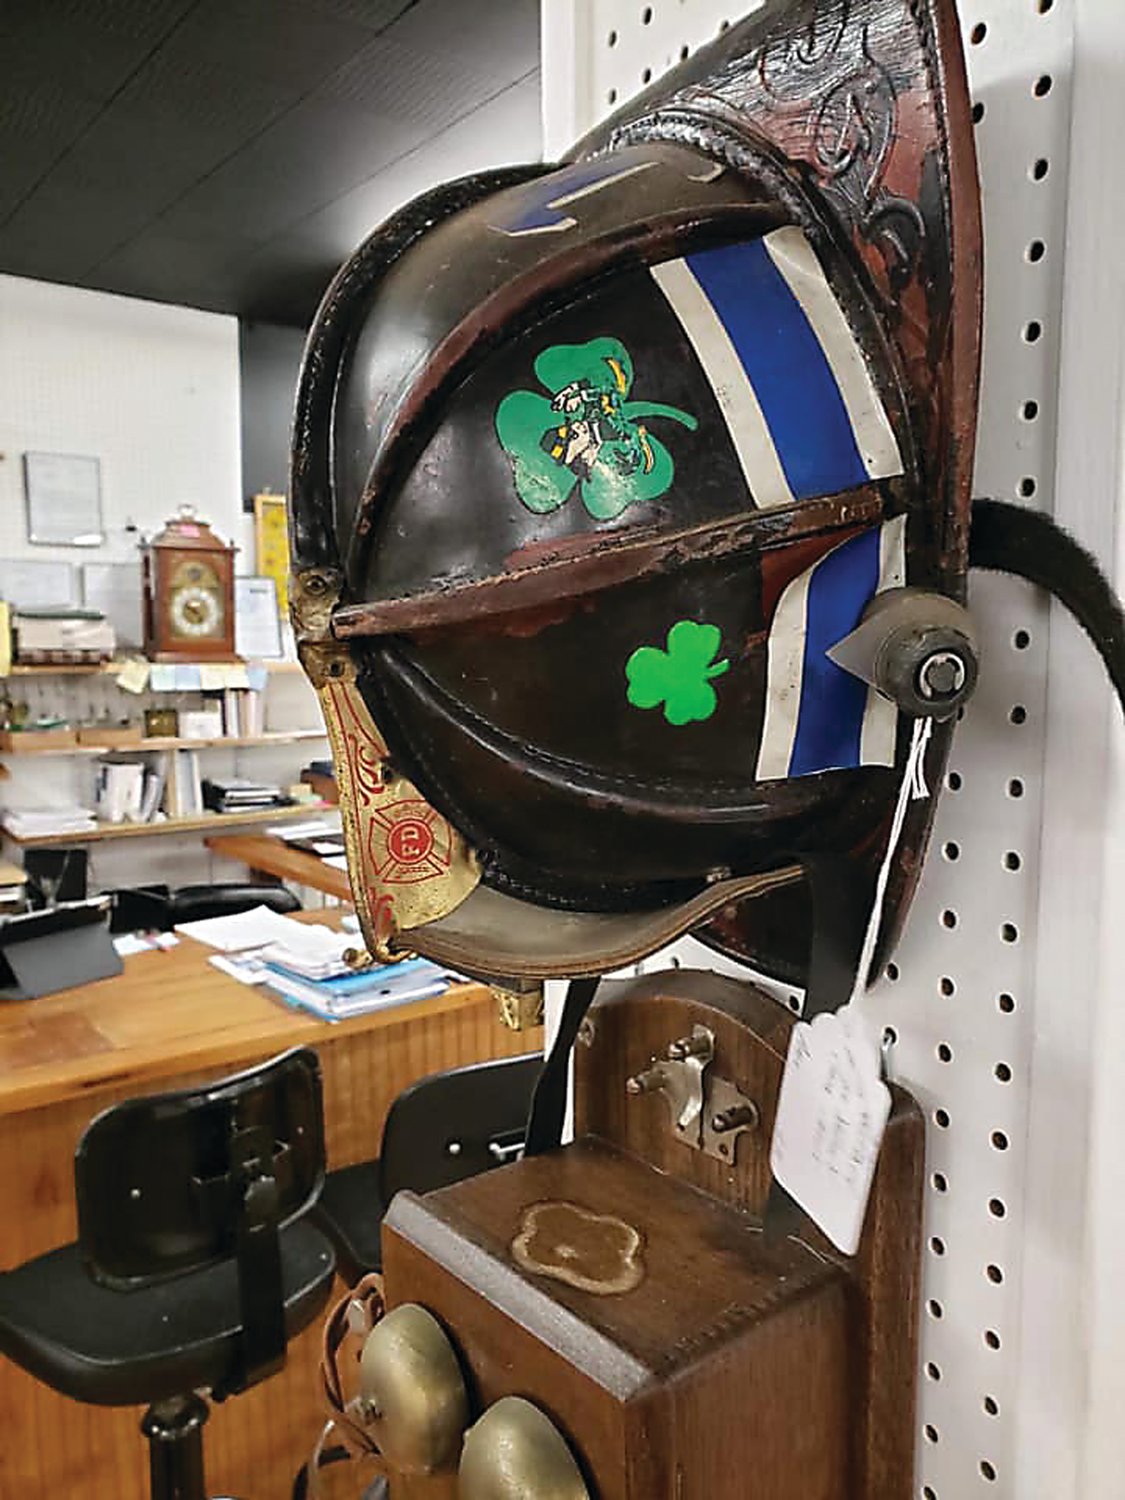 Bud Baughman’s leather fire helmet bounced out of a fire truck as it headed for a demonstration 20 years ago. The helmet surfaced in an antiques shop, where his cousin spotted it.  Photograph by Joe Ferry.